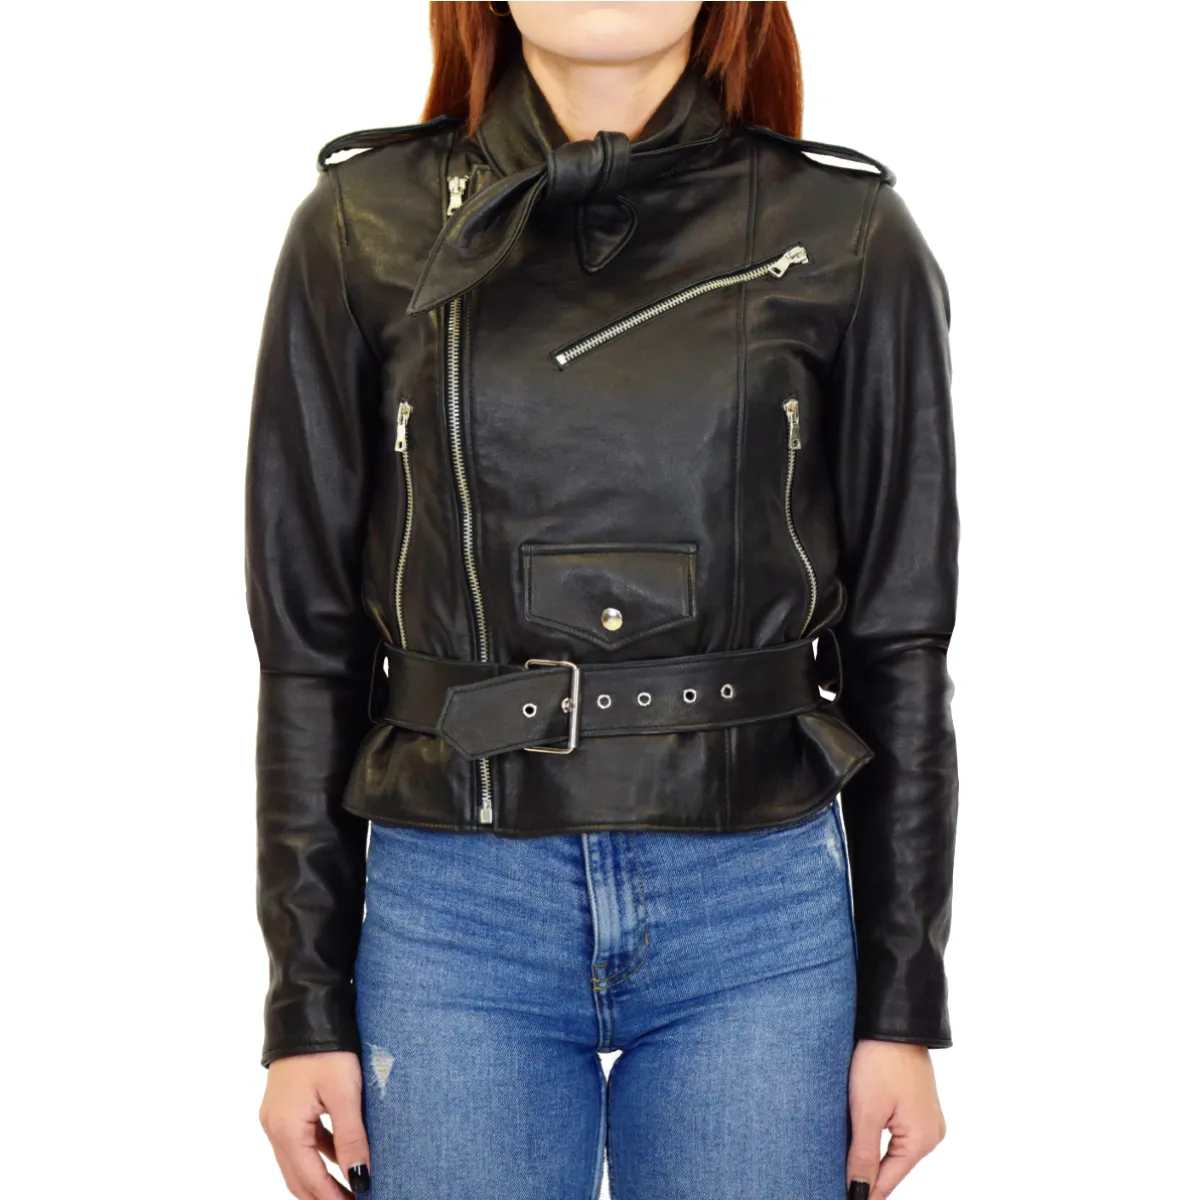 Made In Italy - Women's Leather Jacket in Genuine Leather - Motorcycle Biker style Slim Fit leather custom jacket - Black Color